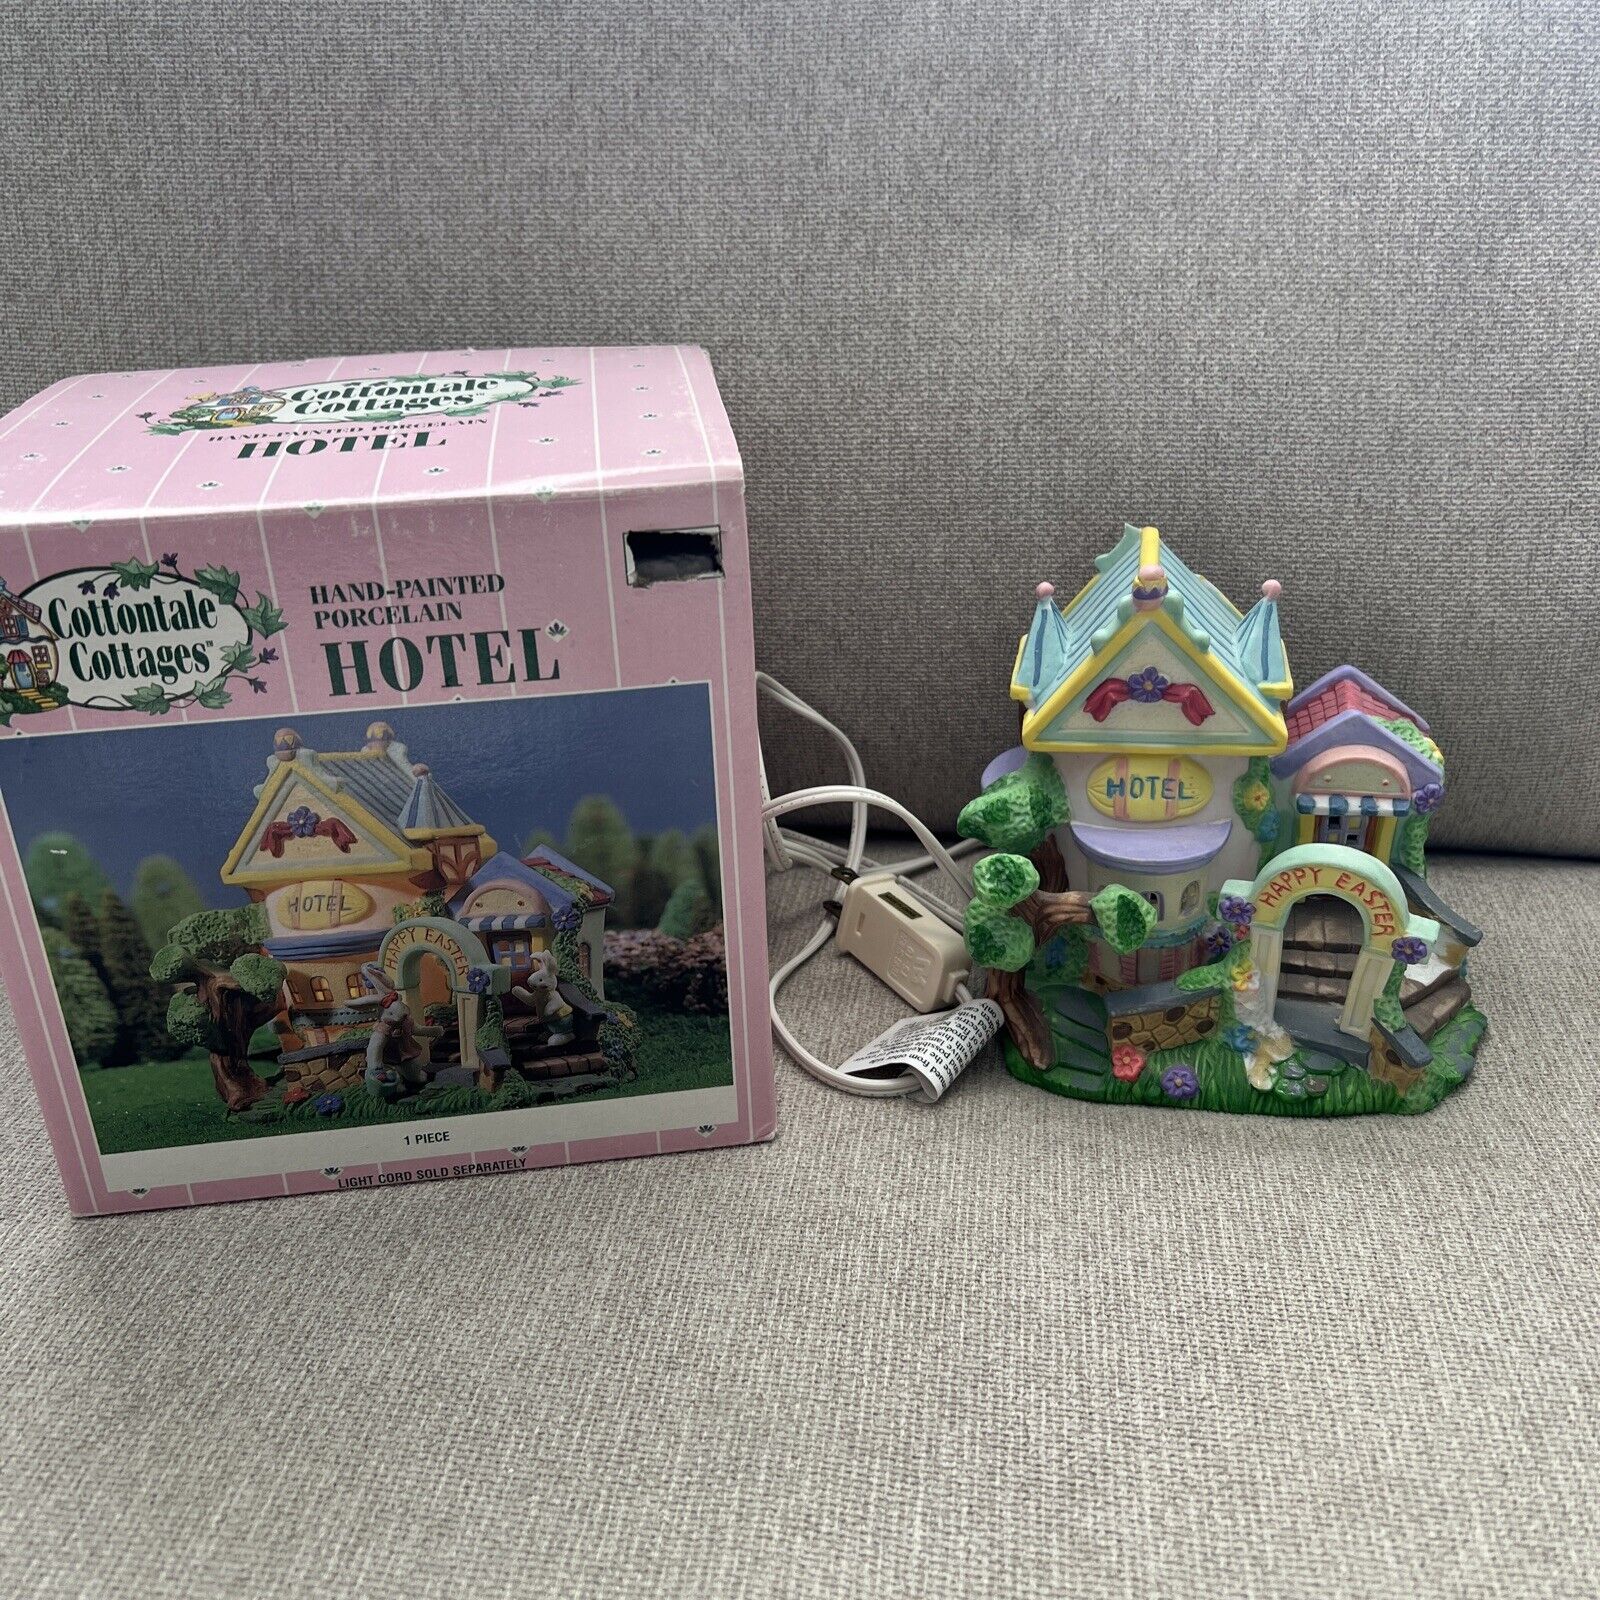 1999 Cottontale Cottages Hand Painted Porcelain House Hotel Easter Village W/box